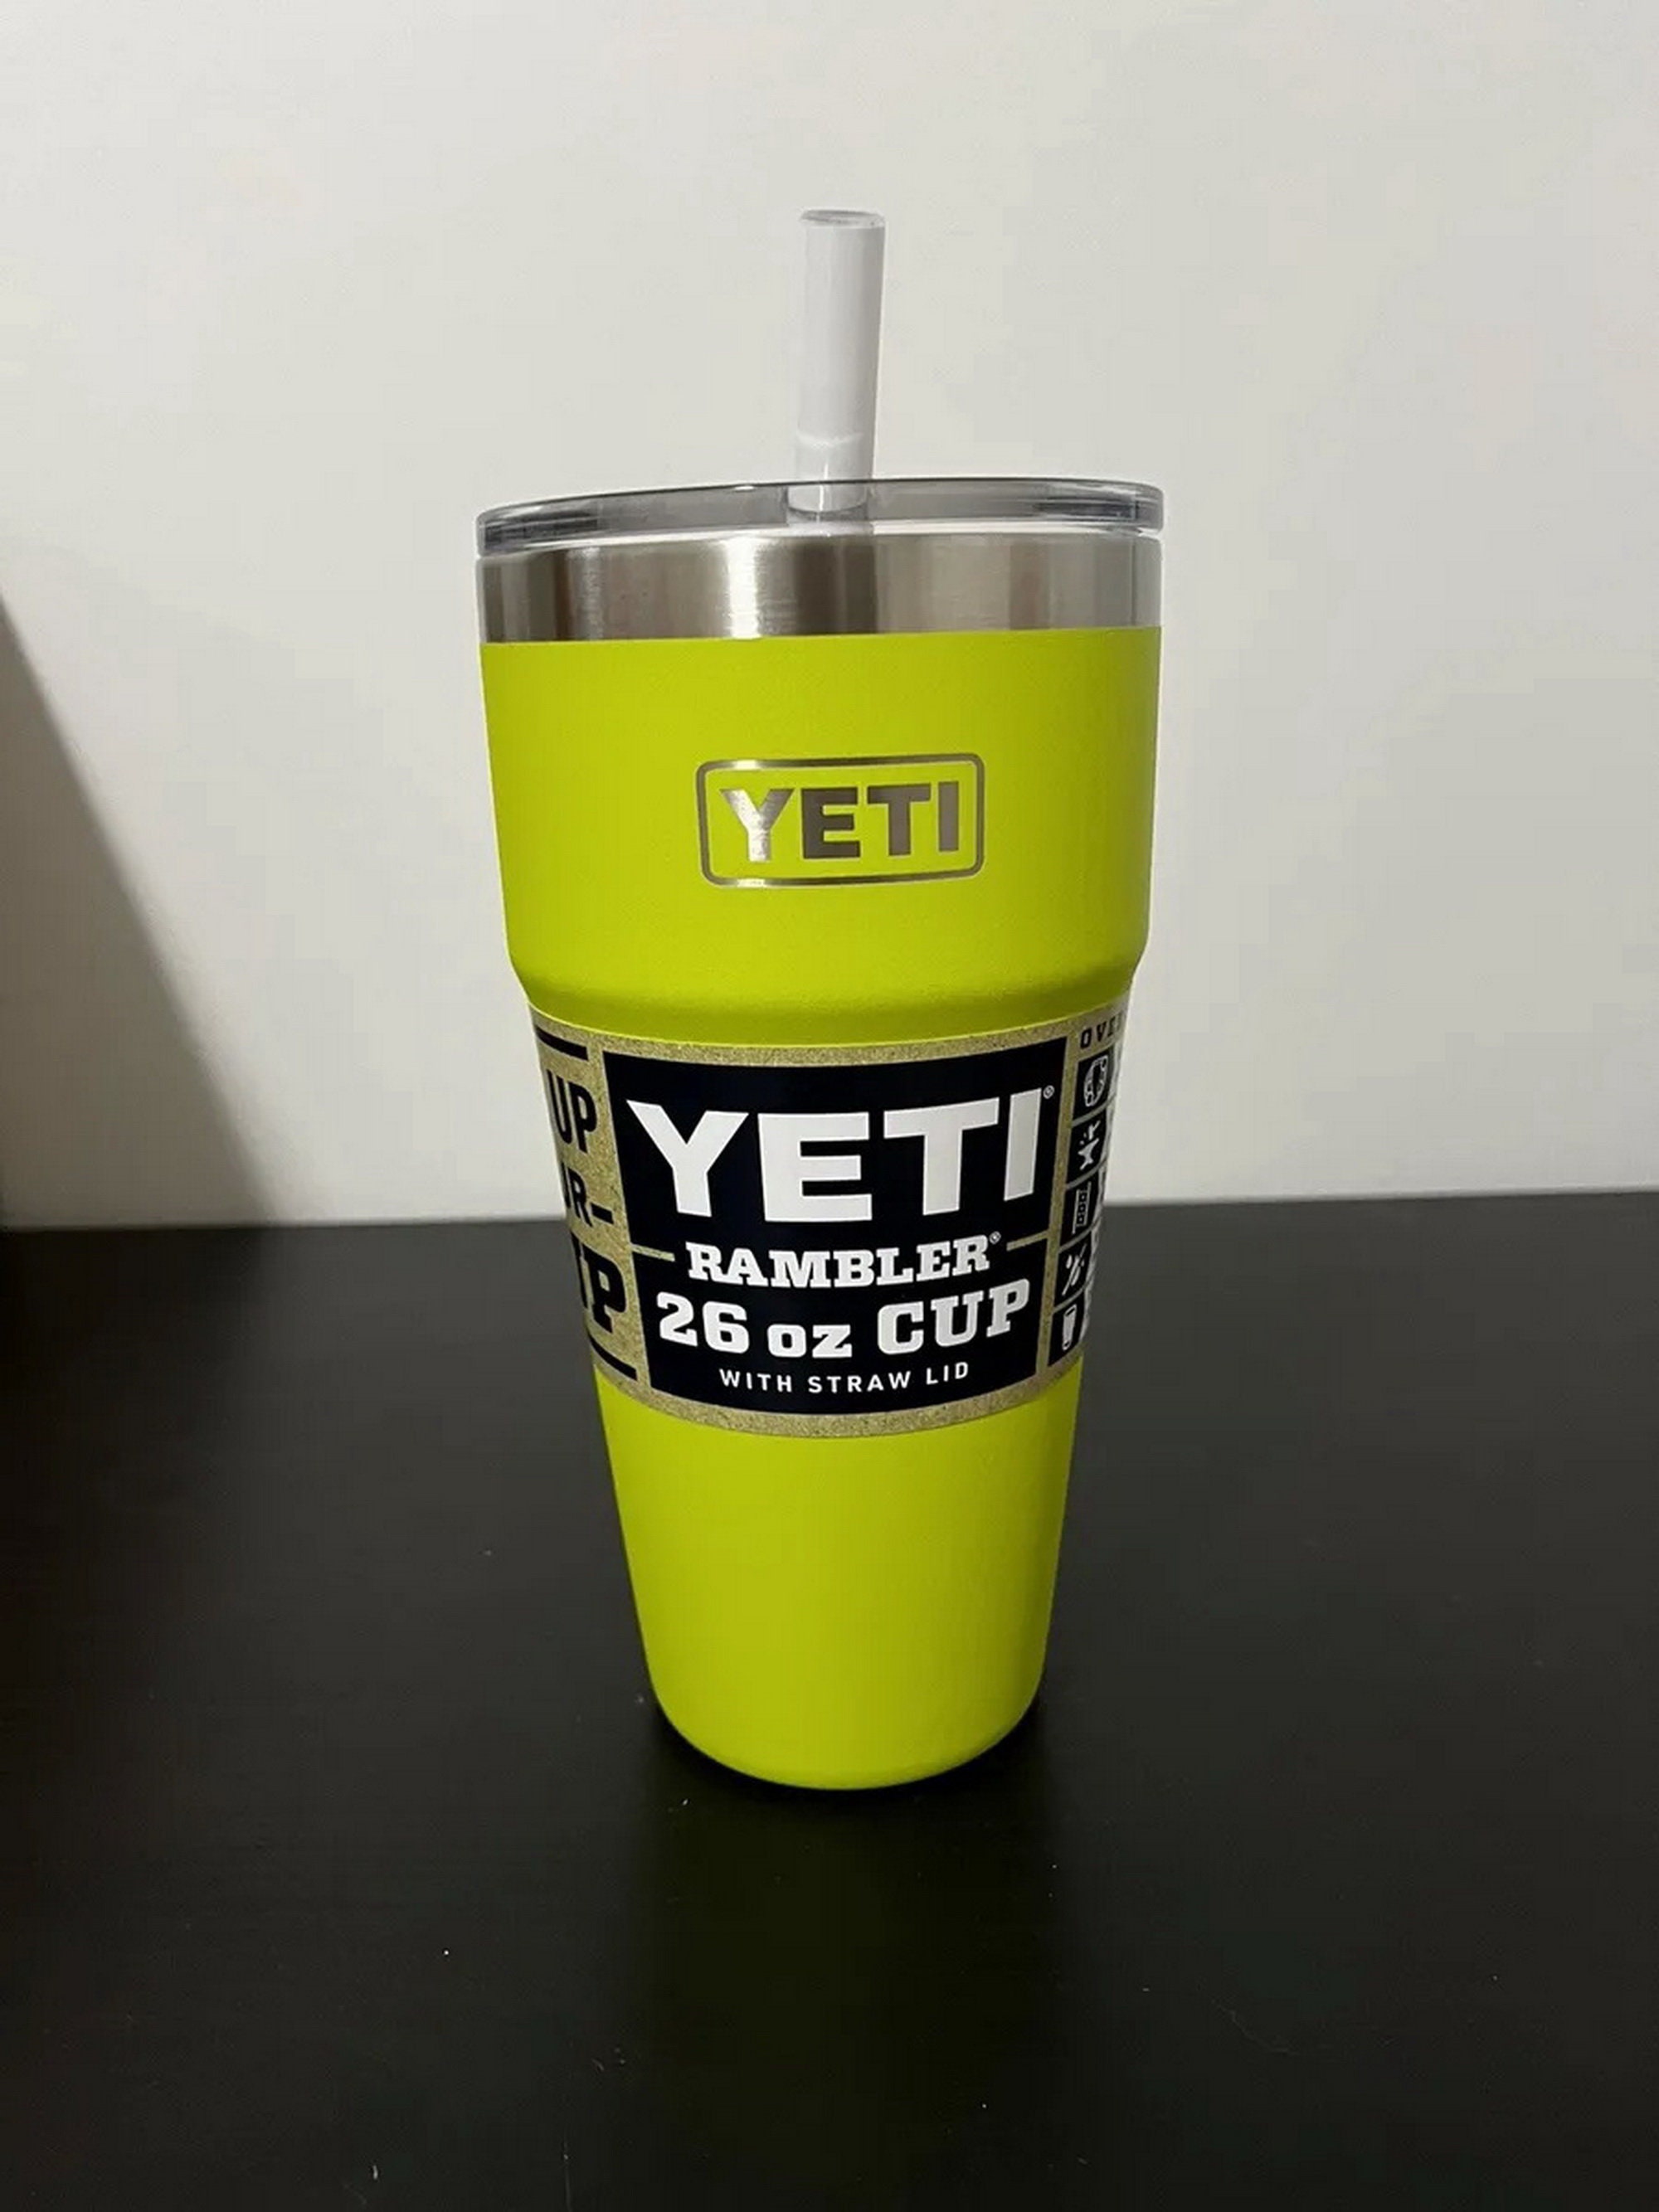 Oz　Etsy　Yeti　Straw　Rambler　Stackable　New　Lid　26　With　Cup　Yeti　Norway